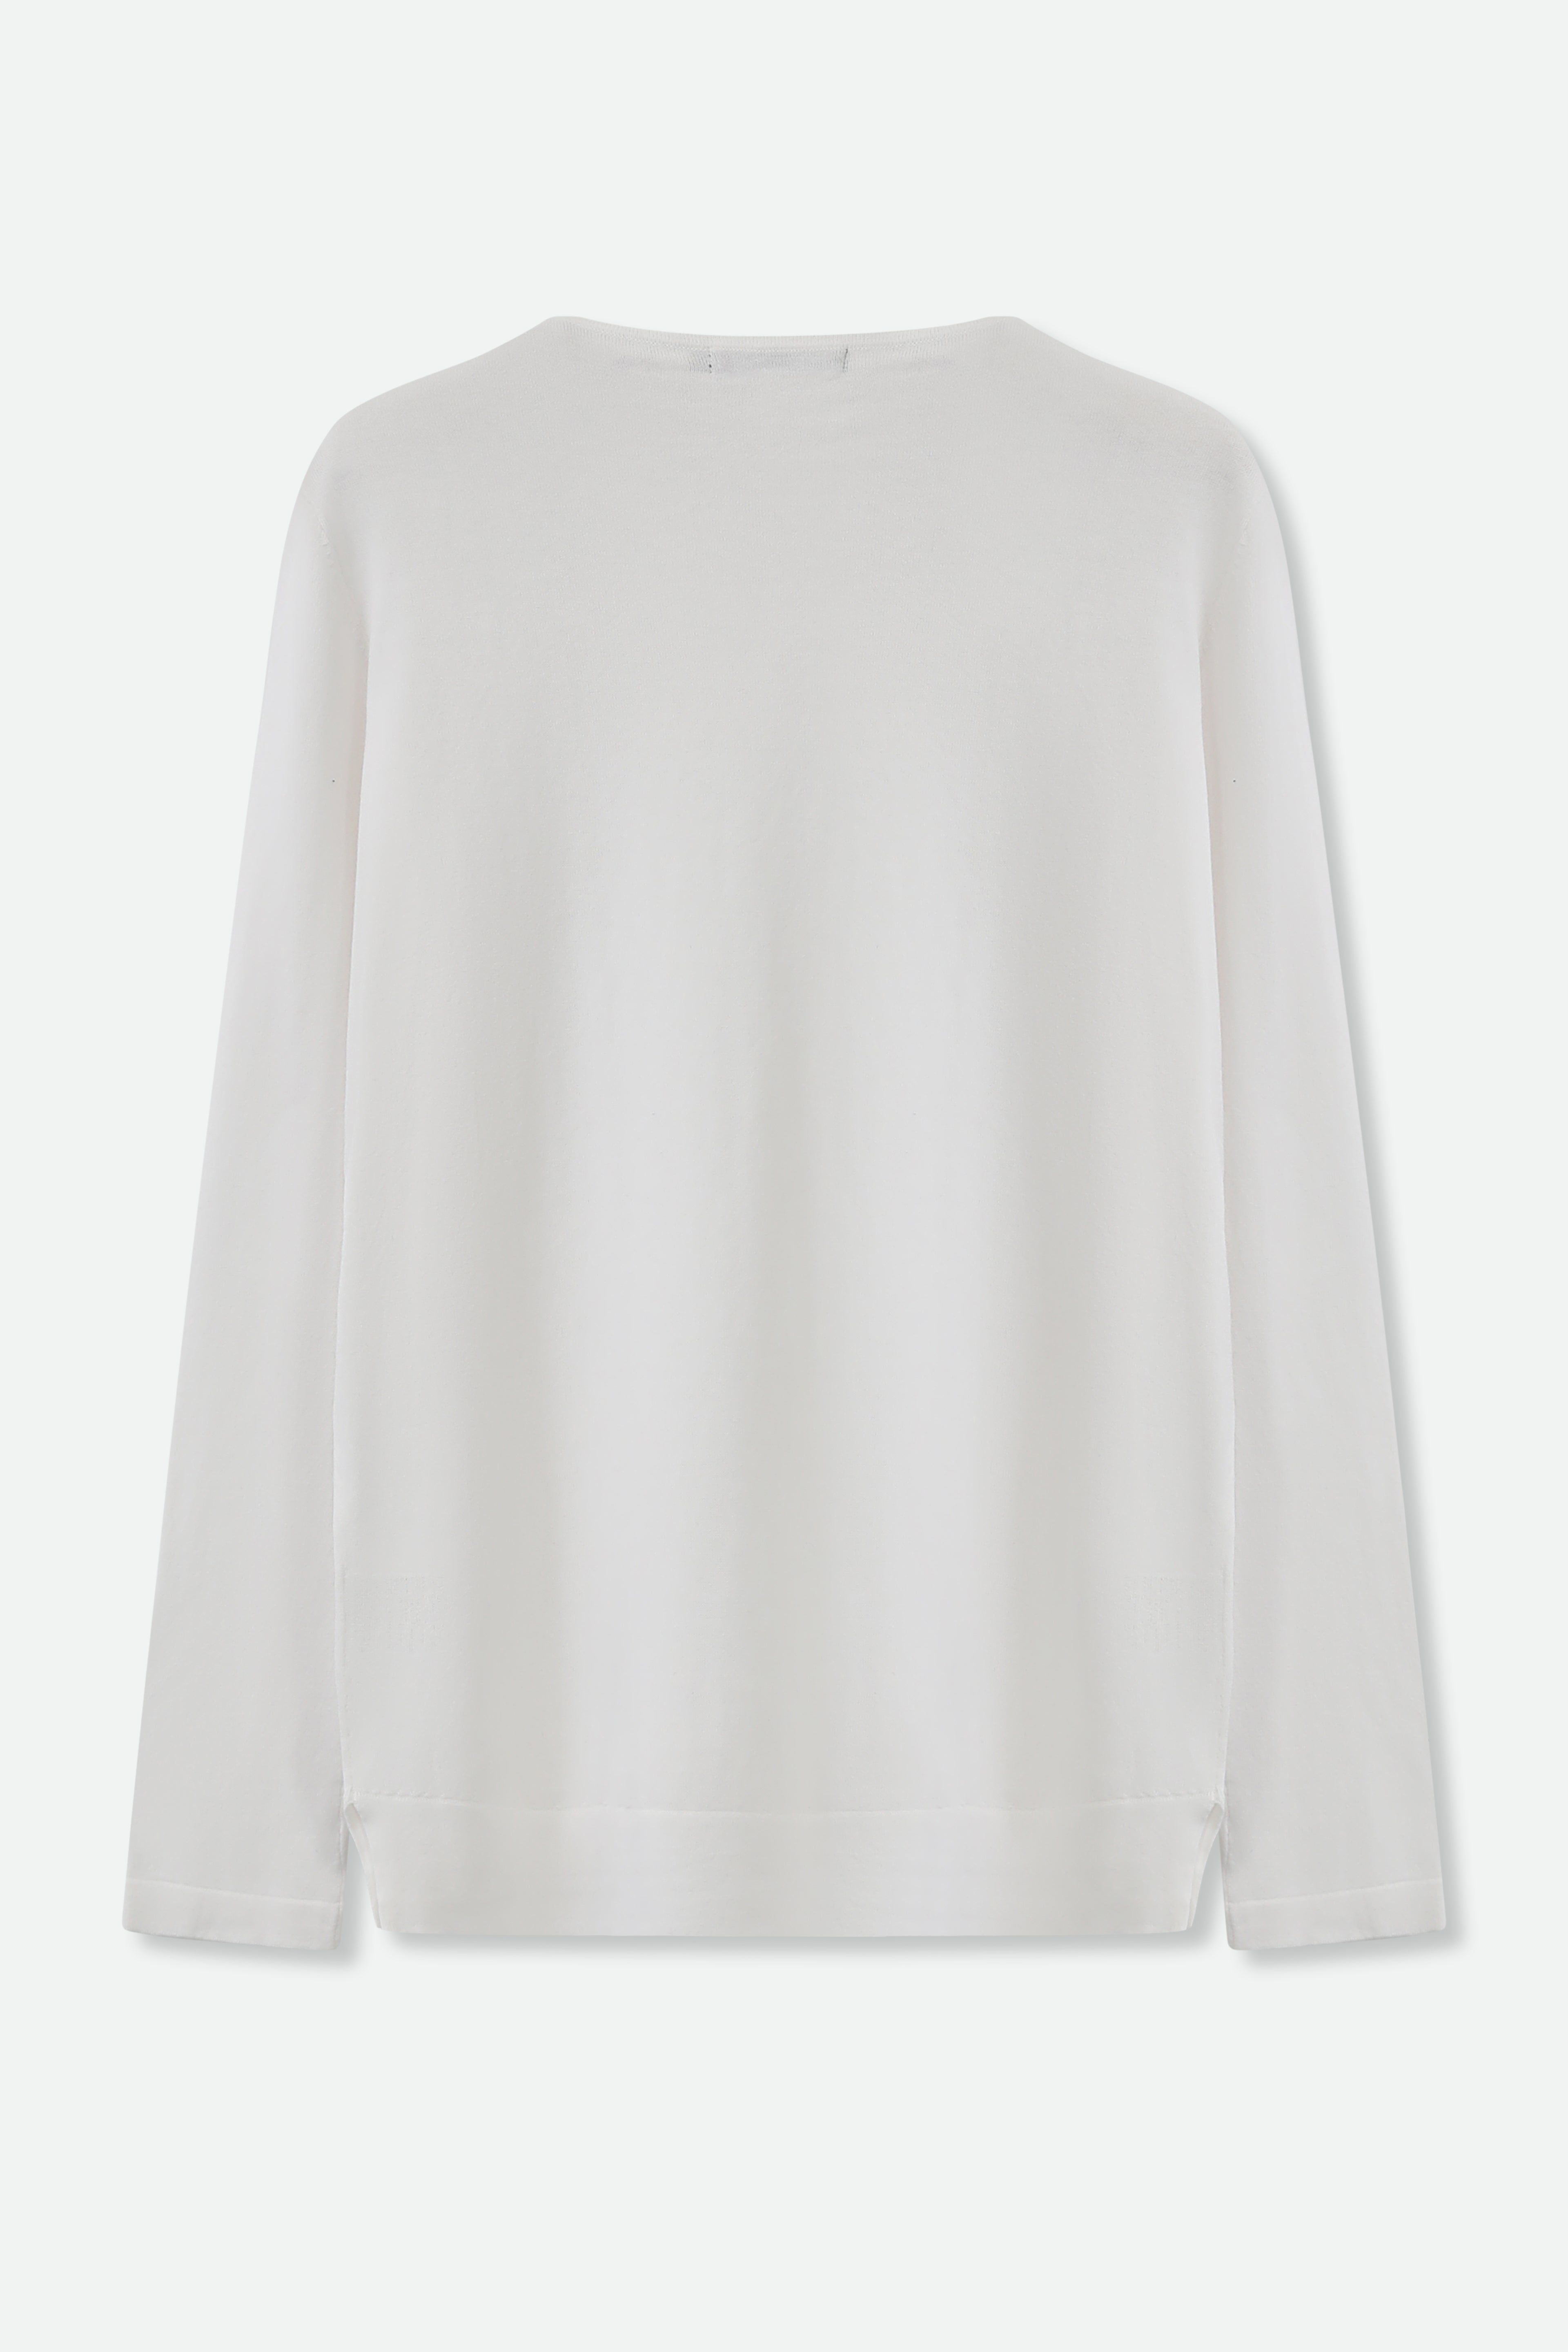 STEVIE LONG SLEEVE CREW IN KNIT PIMA COTTON